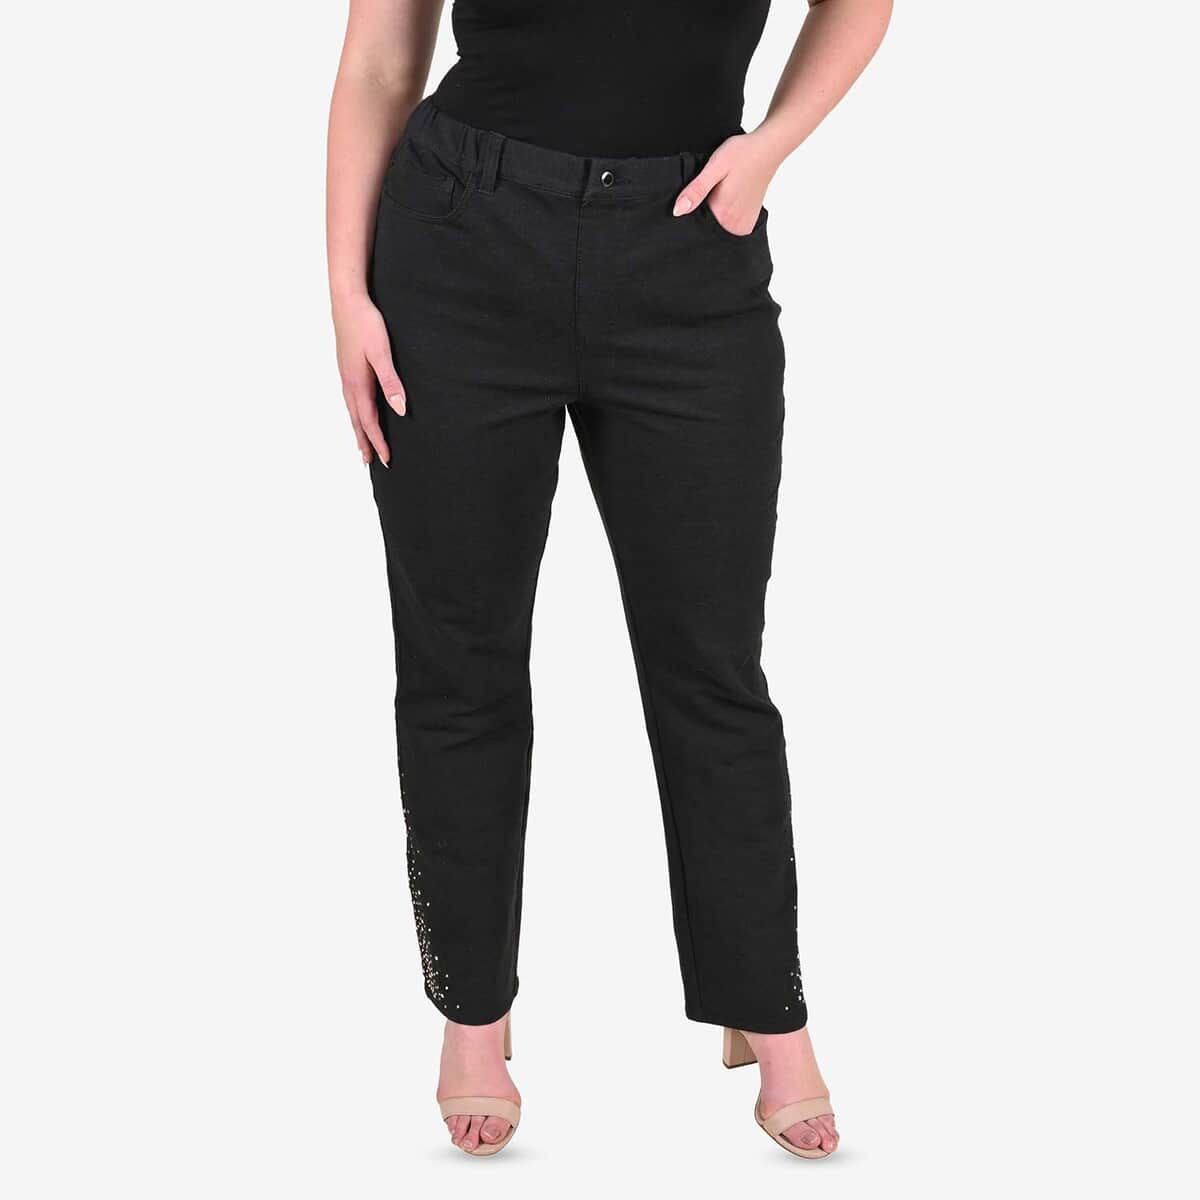 Tamsy Black Pants with Sparkle Detail - L image number 2